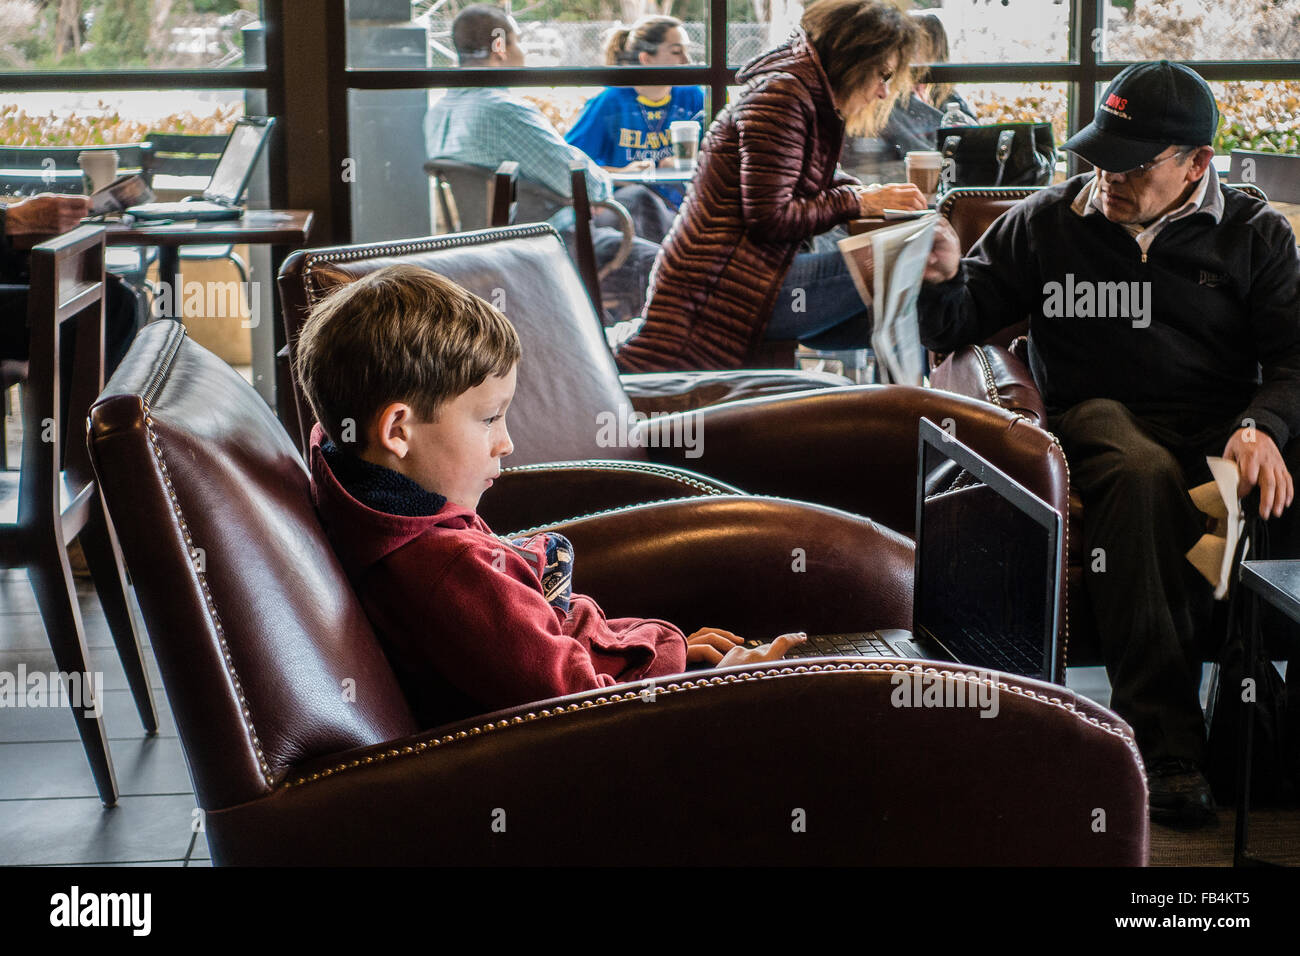 A young technically savvy boy, 10-12 years old, sits in a coffee shop with a big laptop on his lap as he concentrates on it. Stock Photo